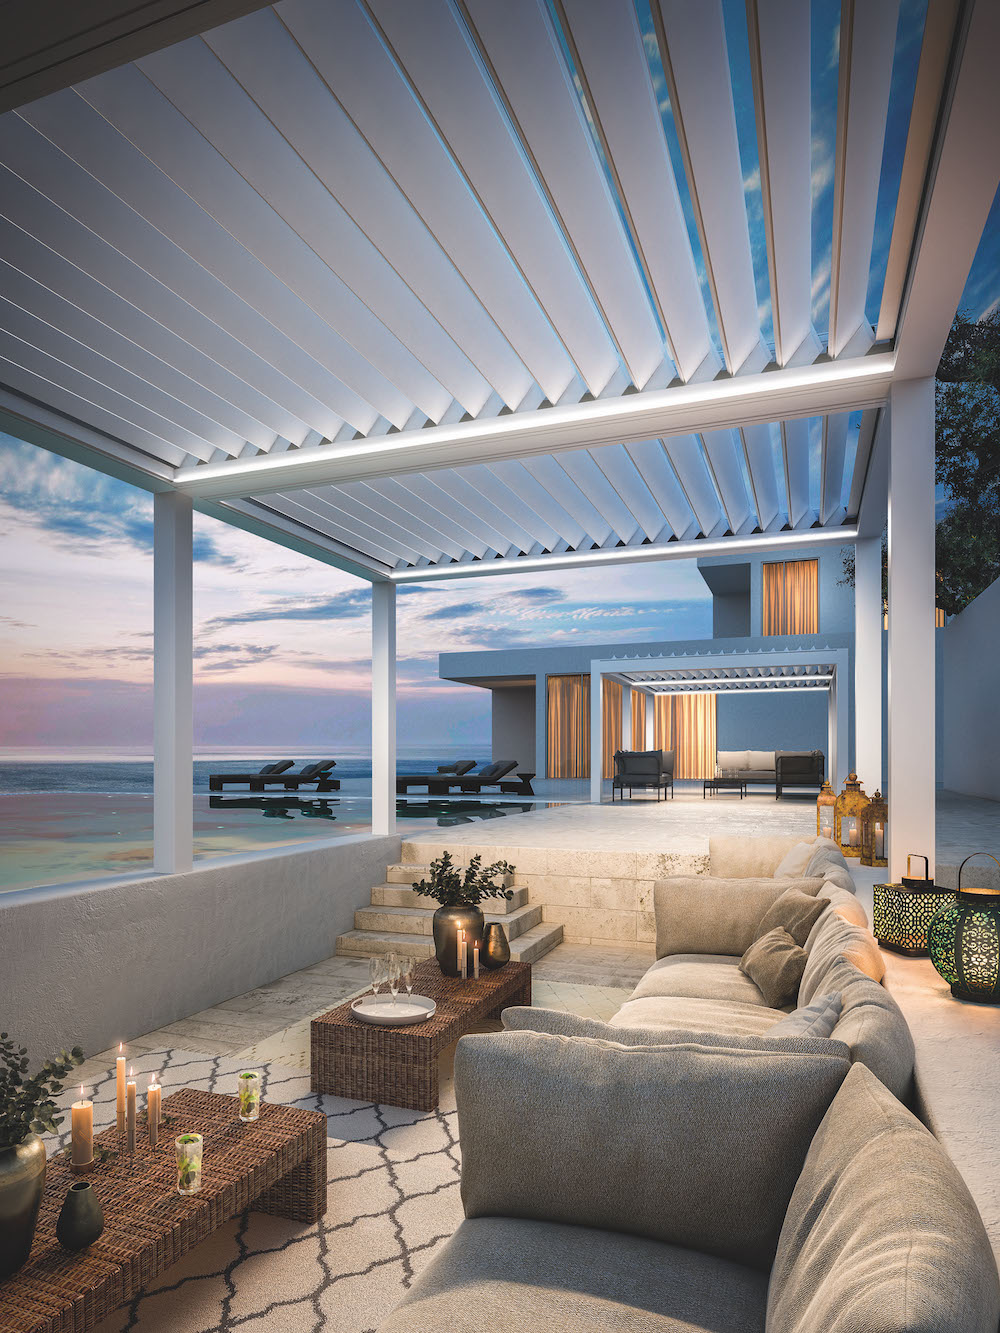 modern home with motorized pergola, outdoor furniture and infinity pool overlooking ocean